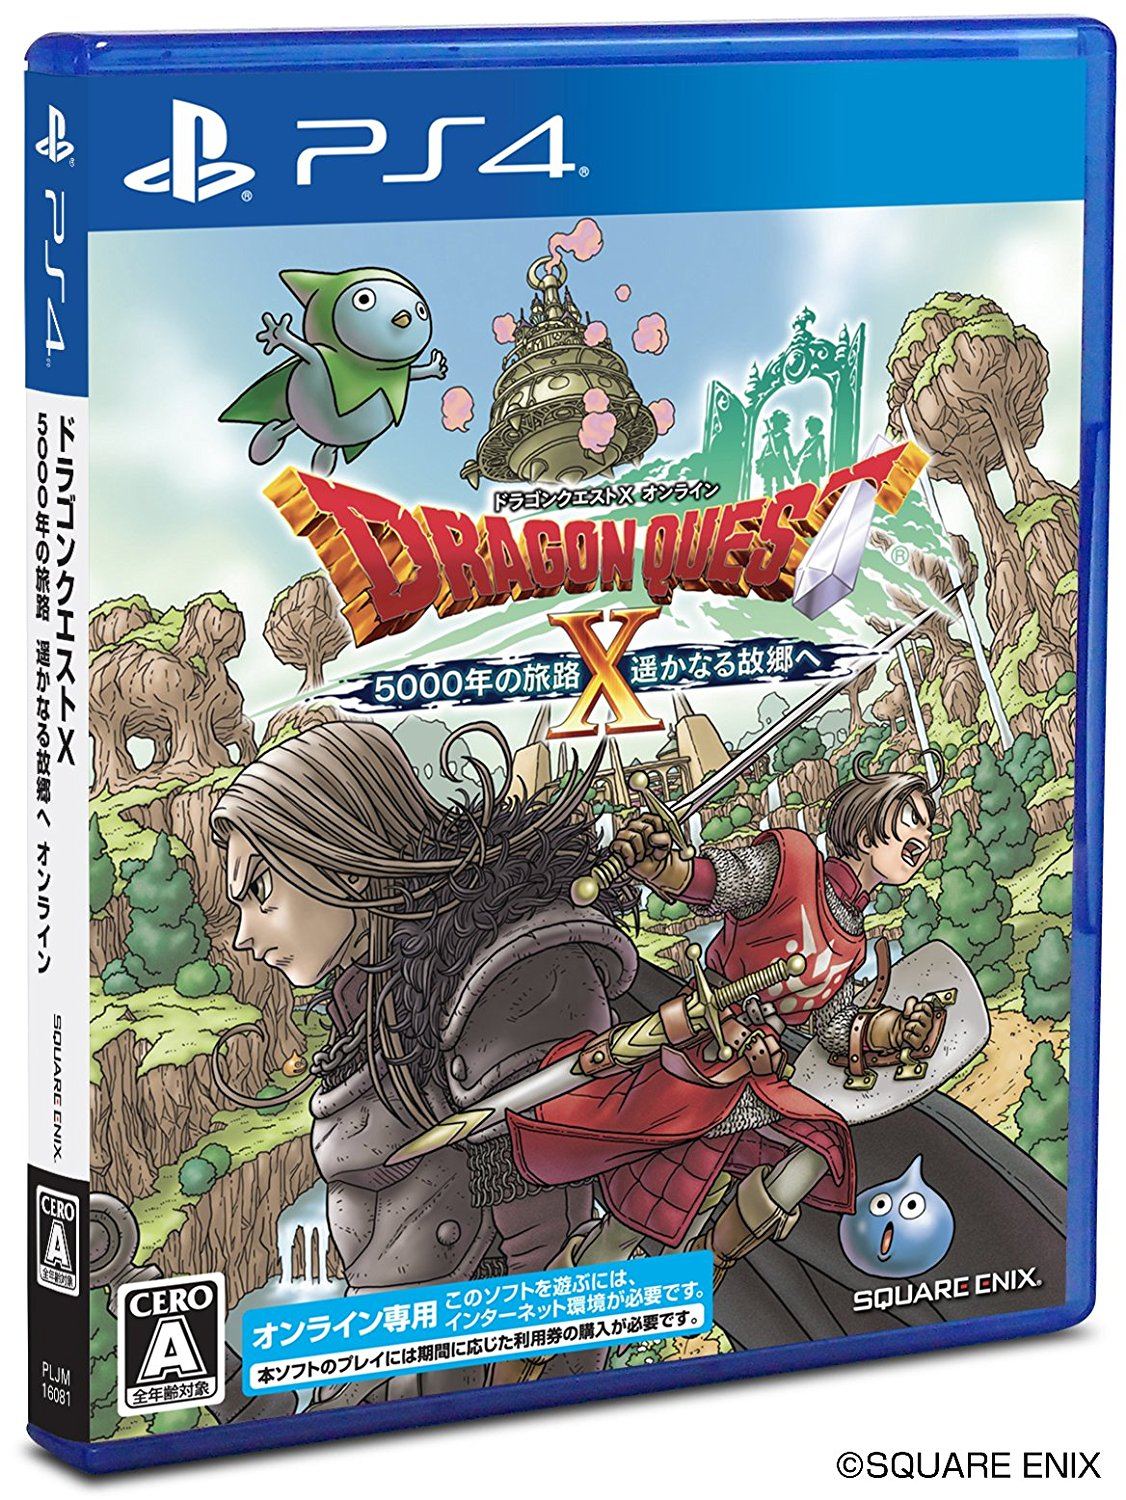 Dragon Quest X 5000 Year Journey To A Faraway Hometown